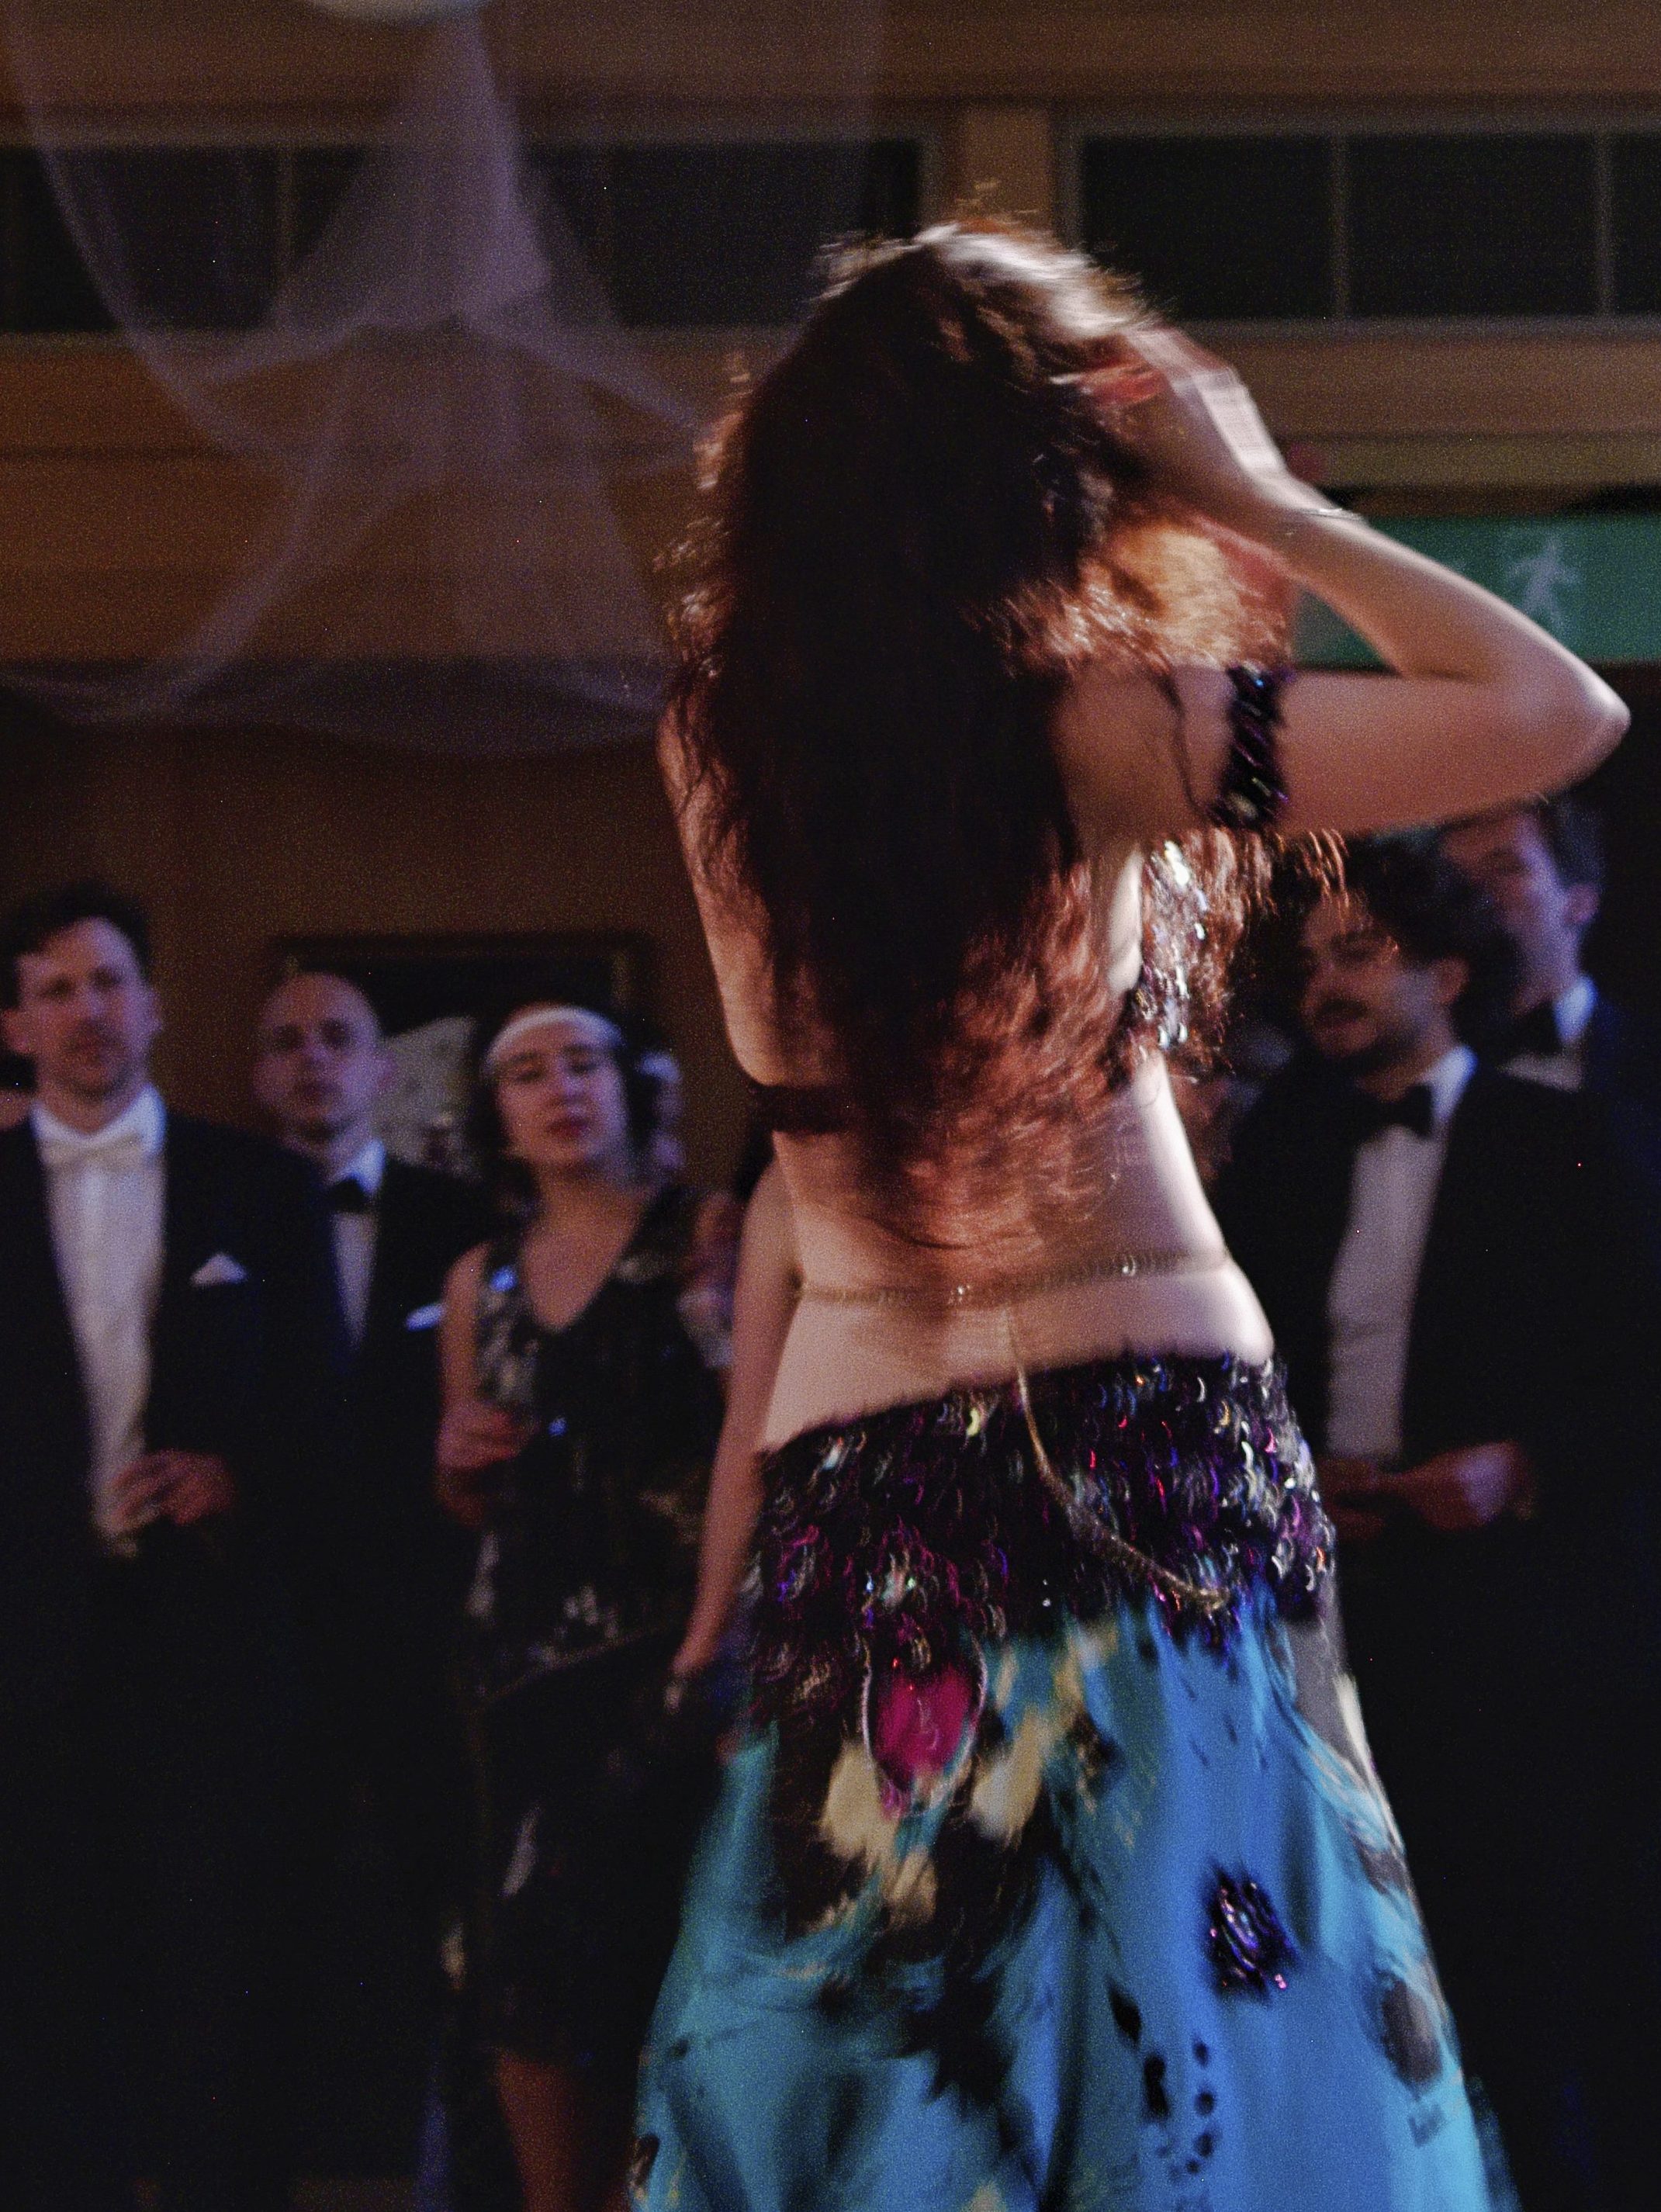 Bellydance performance at an Oxford college ball